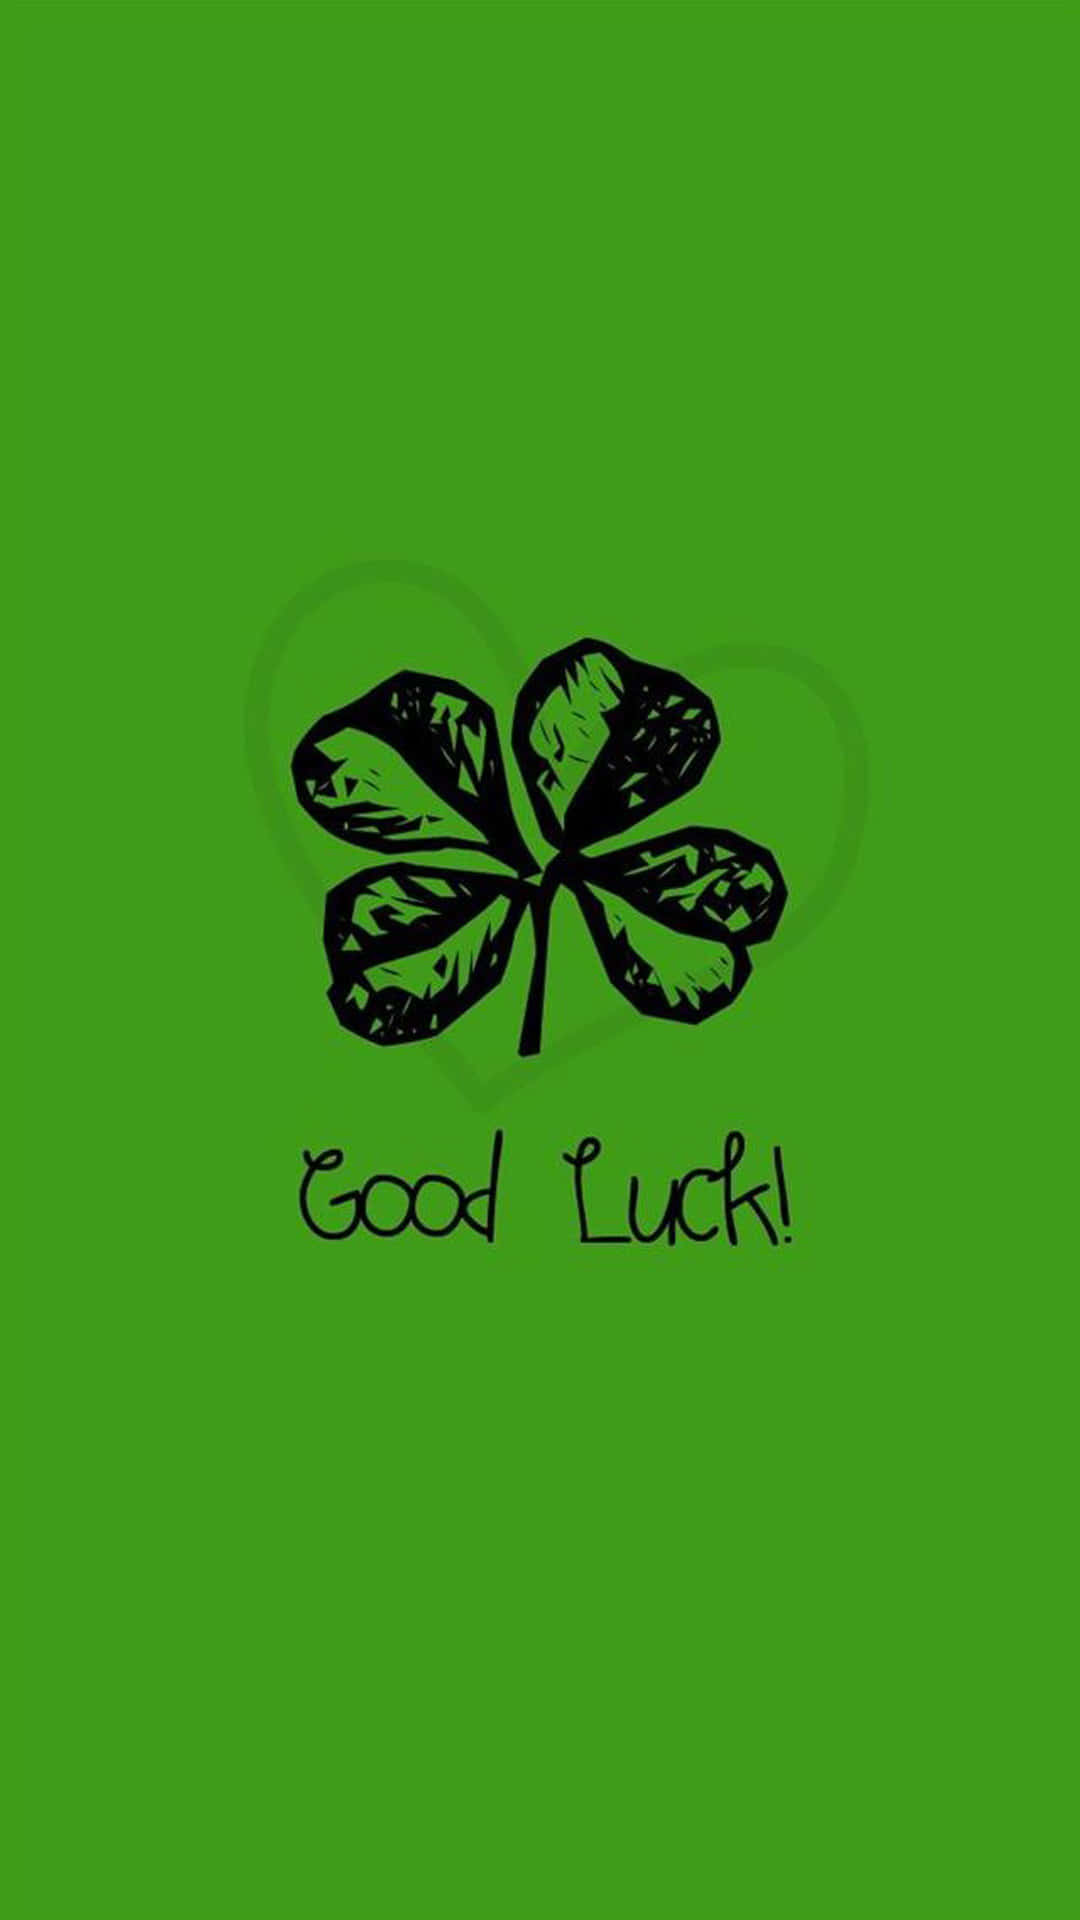 A Green Background With A Clover And The Words Good Luck